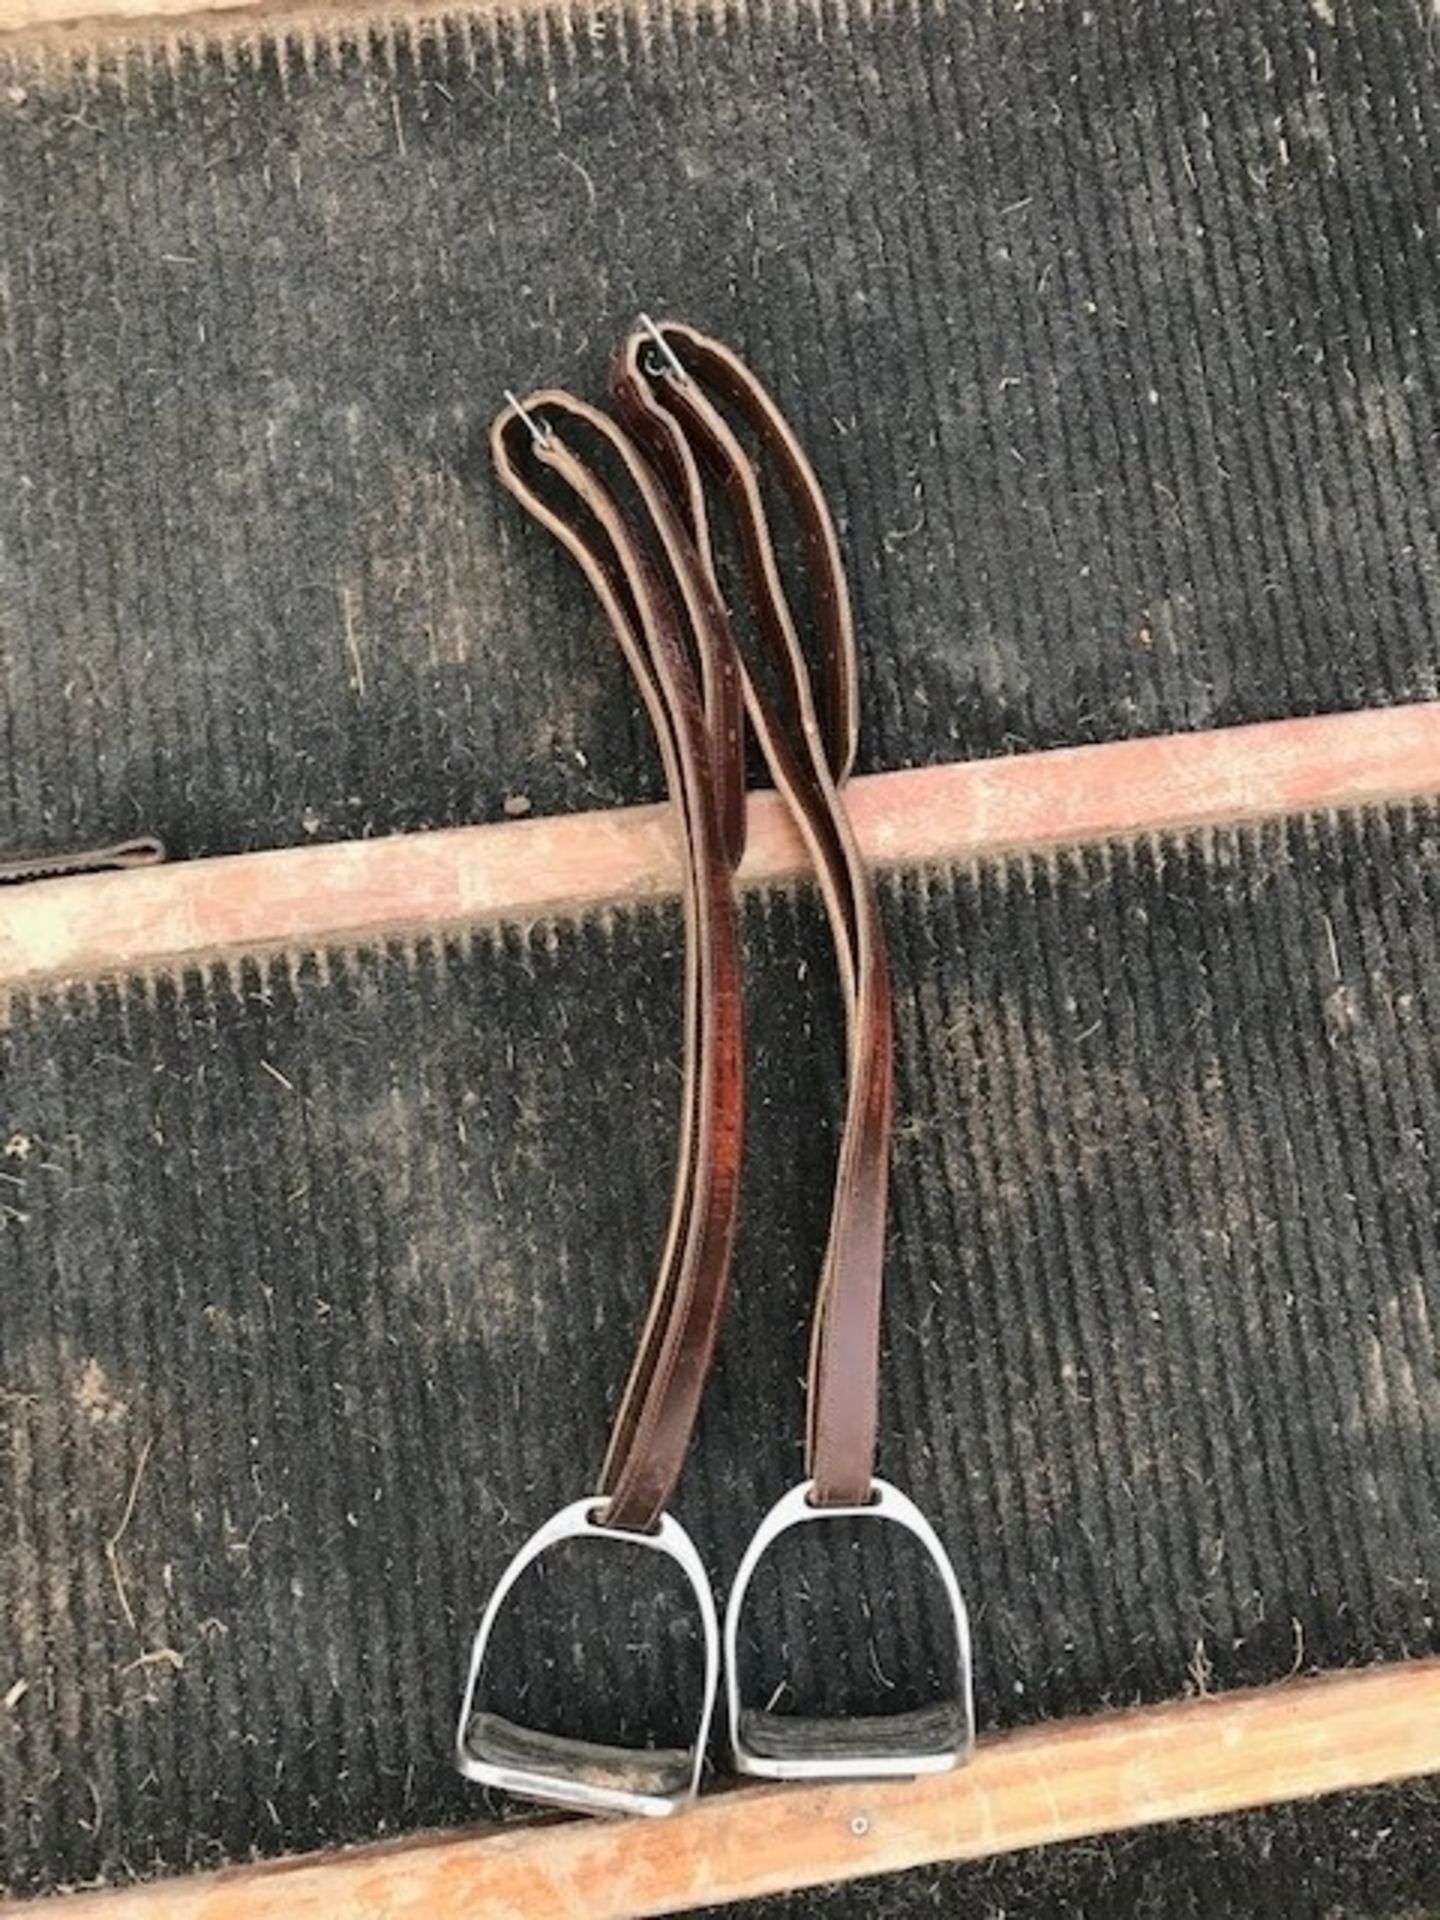 Pair of stirrup irons and leathers